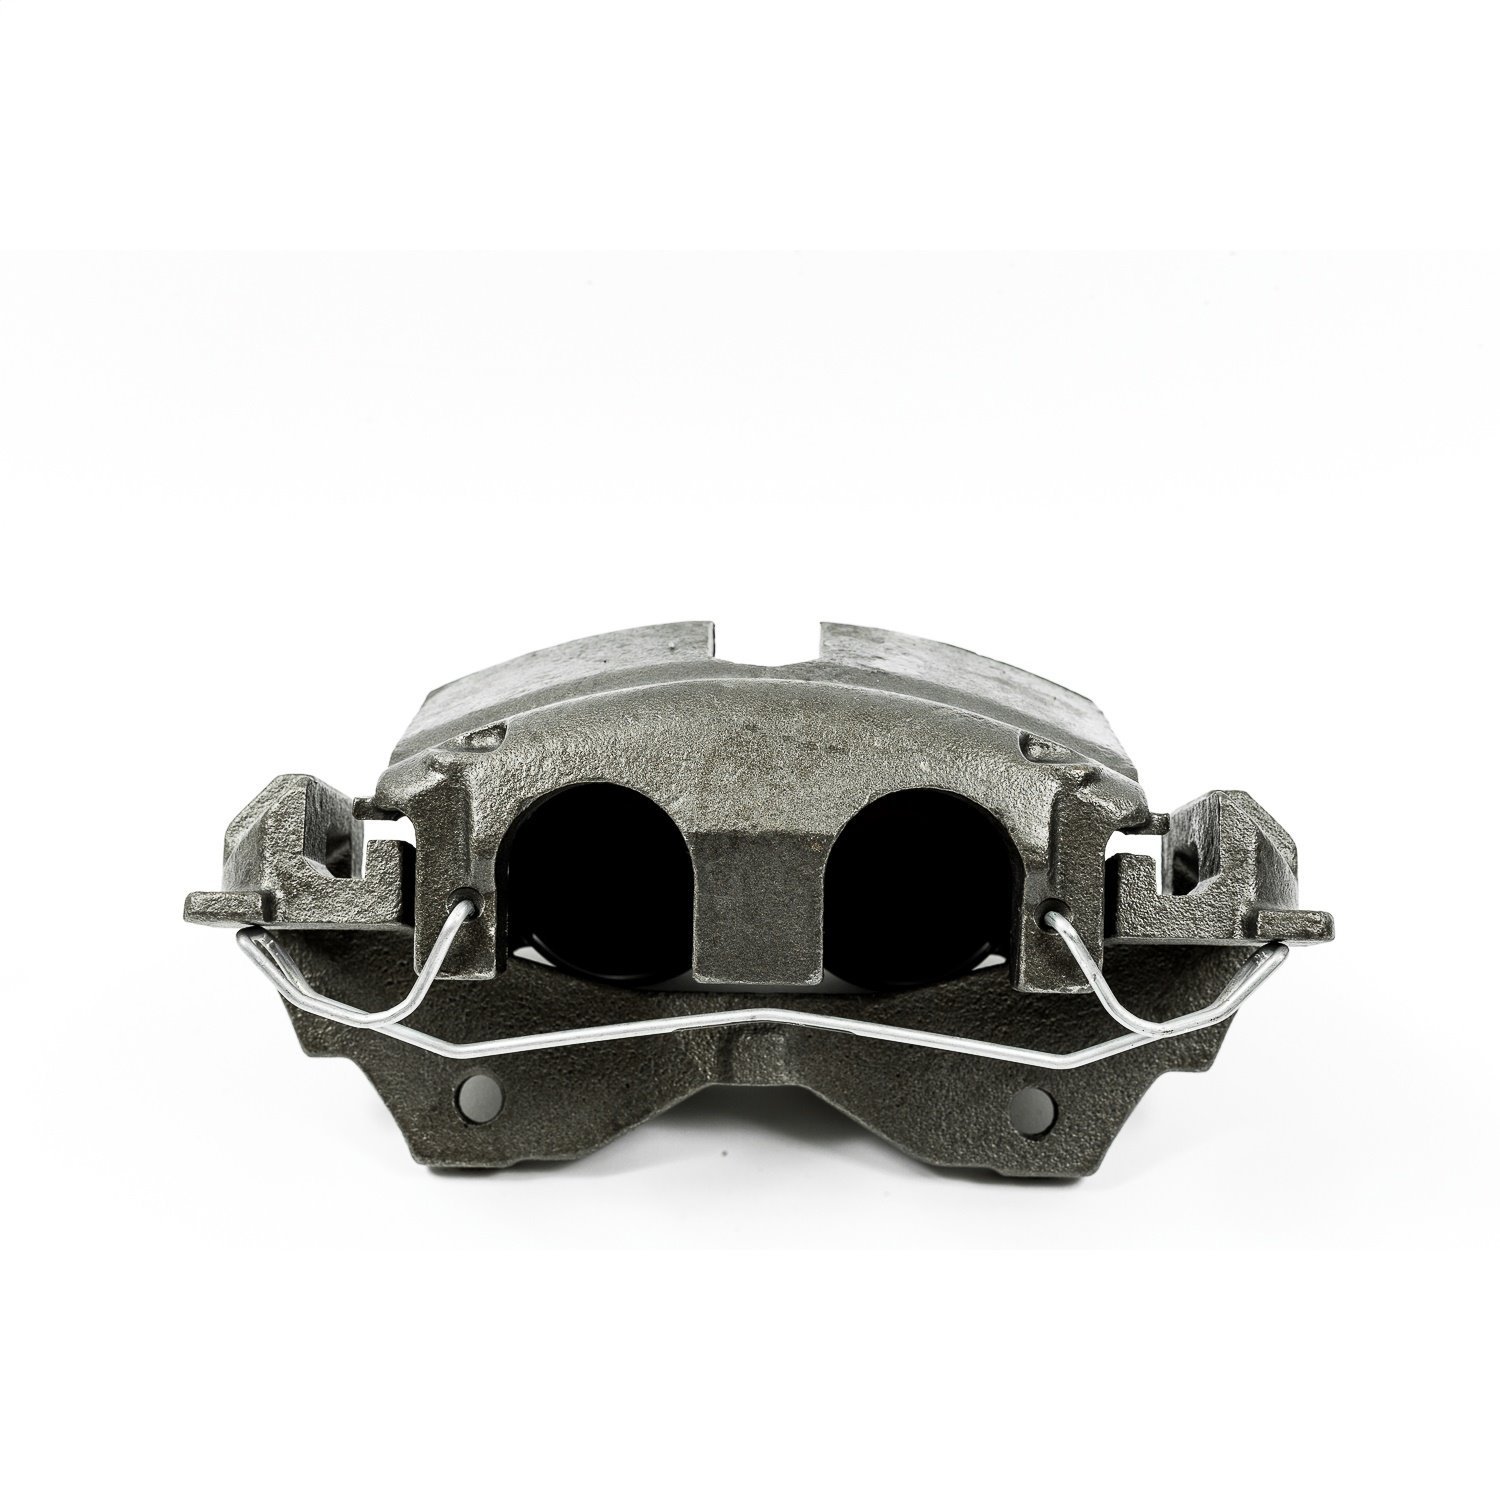 OE REPLACEMENT CALIPER - Front 02-99 Jeep Grand Cherokee/